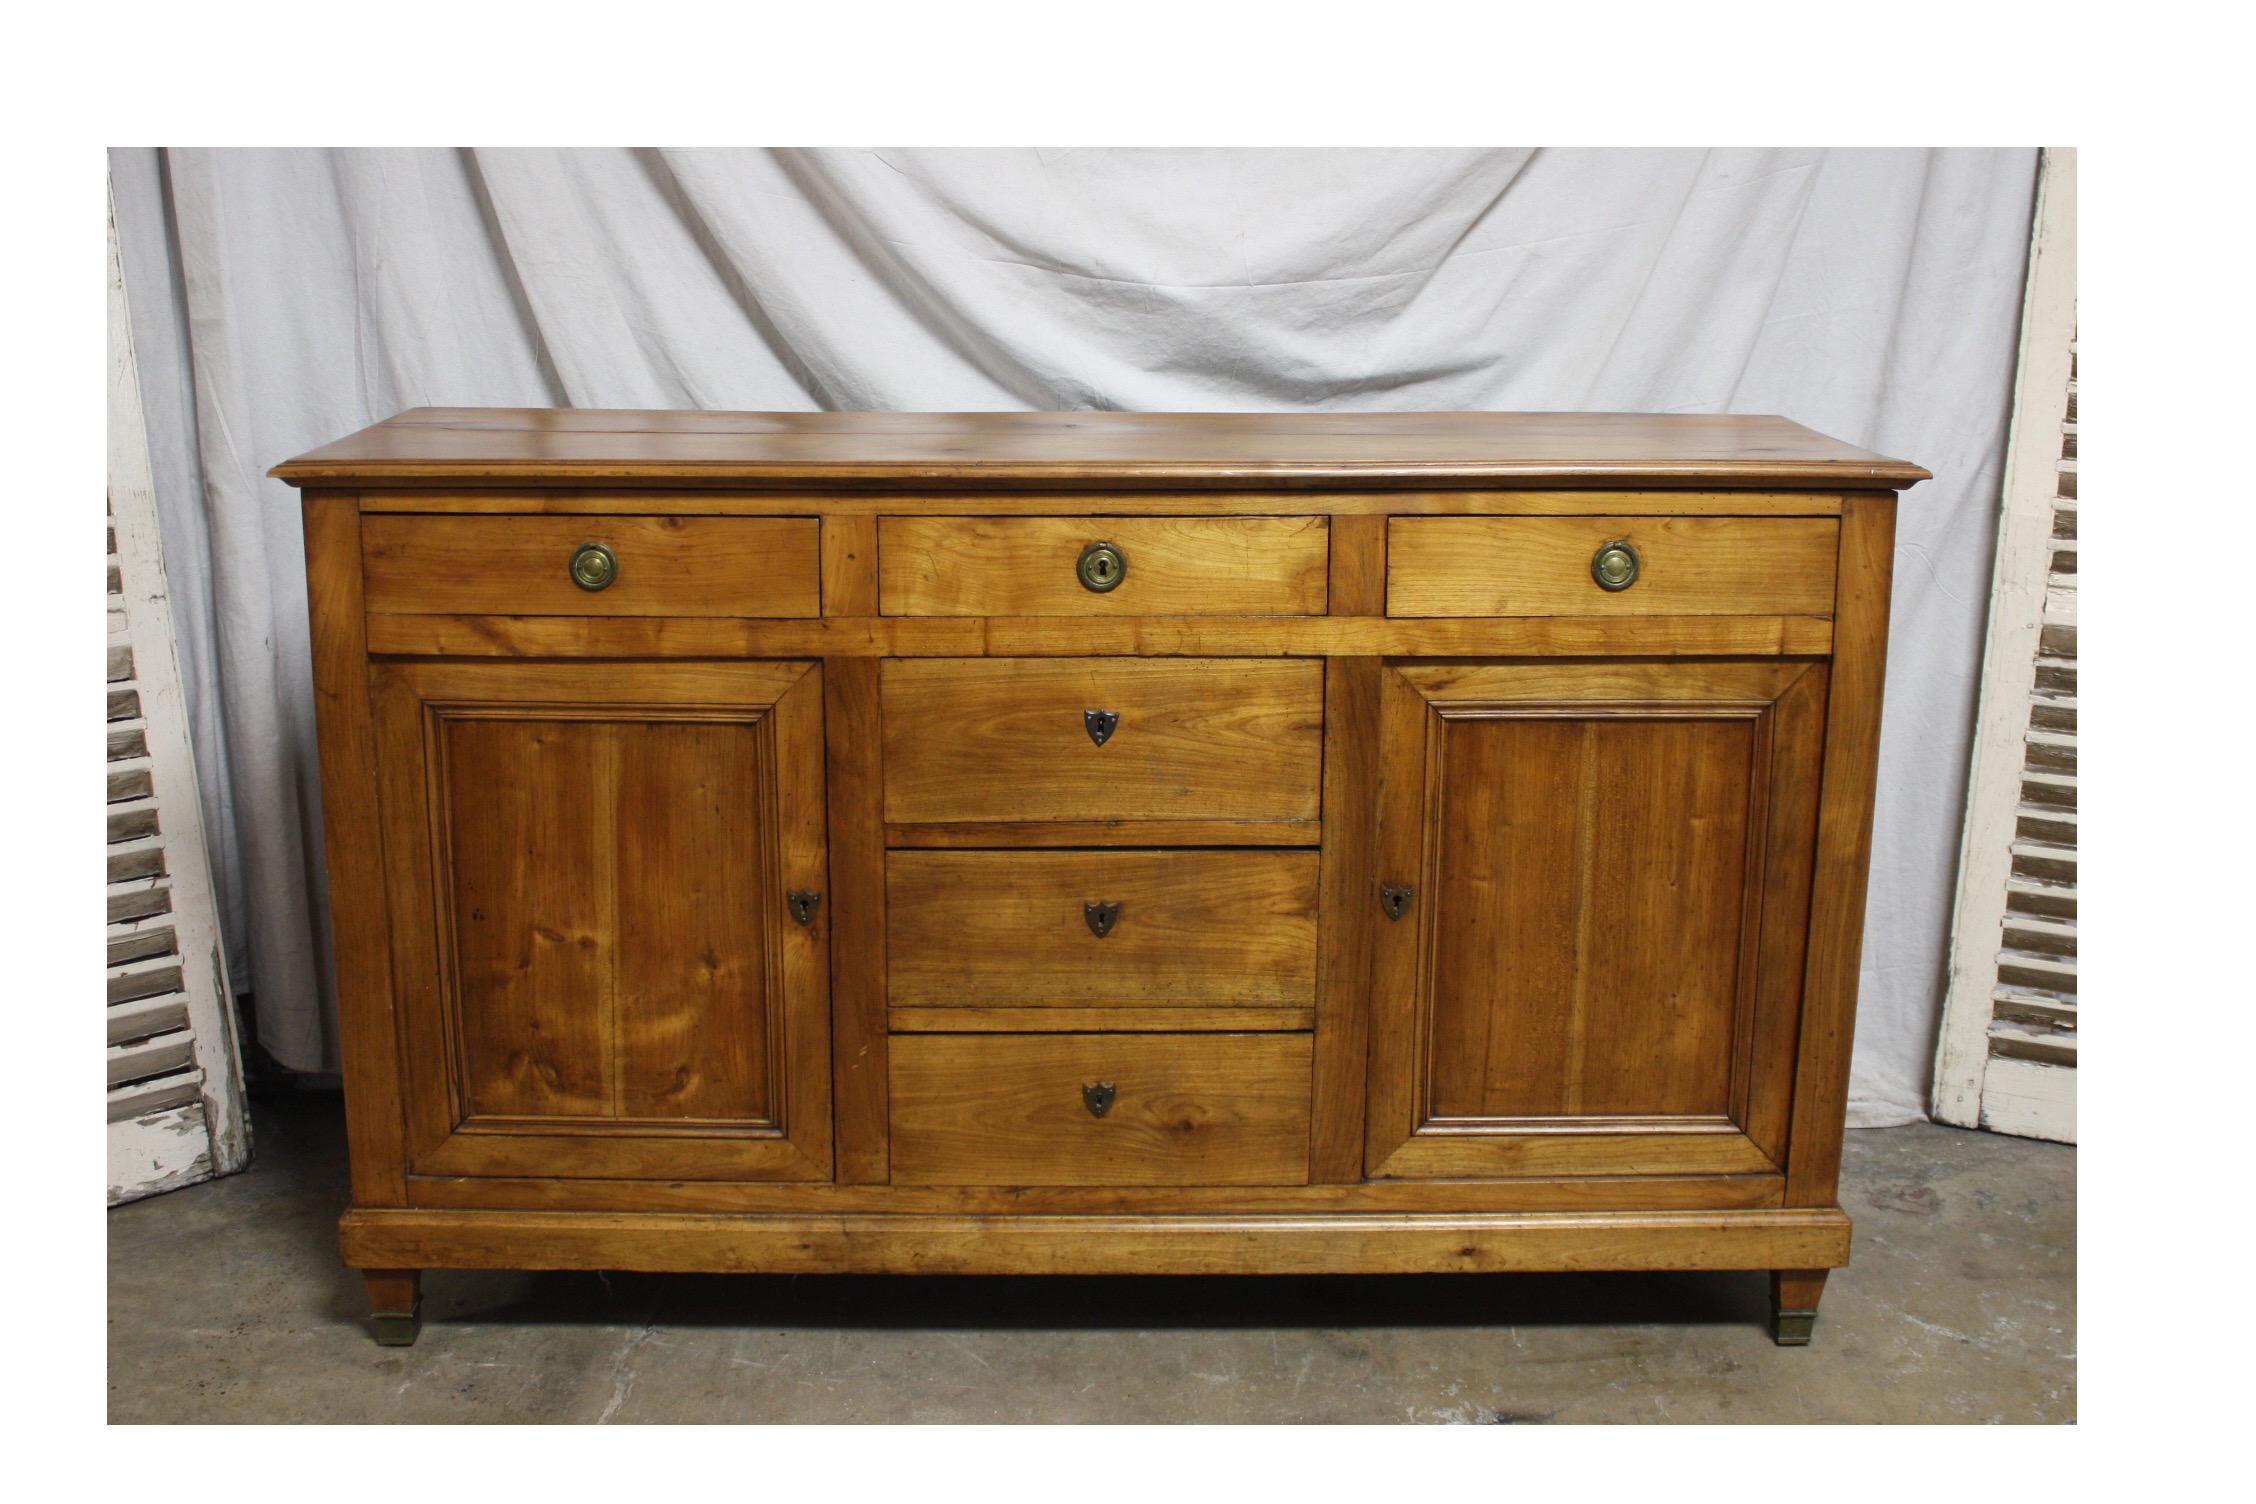 Beautiful French 18th century sideboard Louis XVI period. This magnificent blond walnut shows the nut of the wood. This piece has very pure line and can be matched with modern.